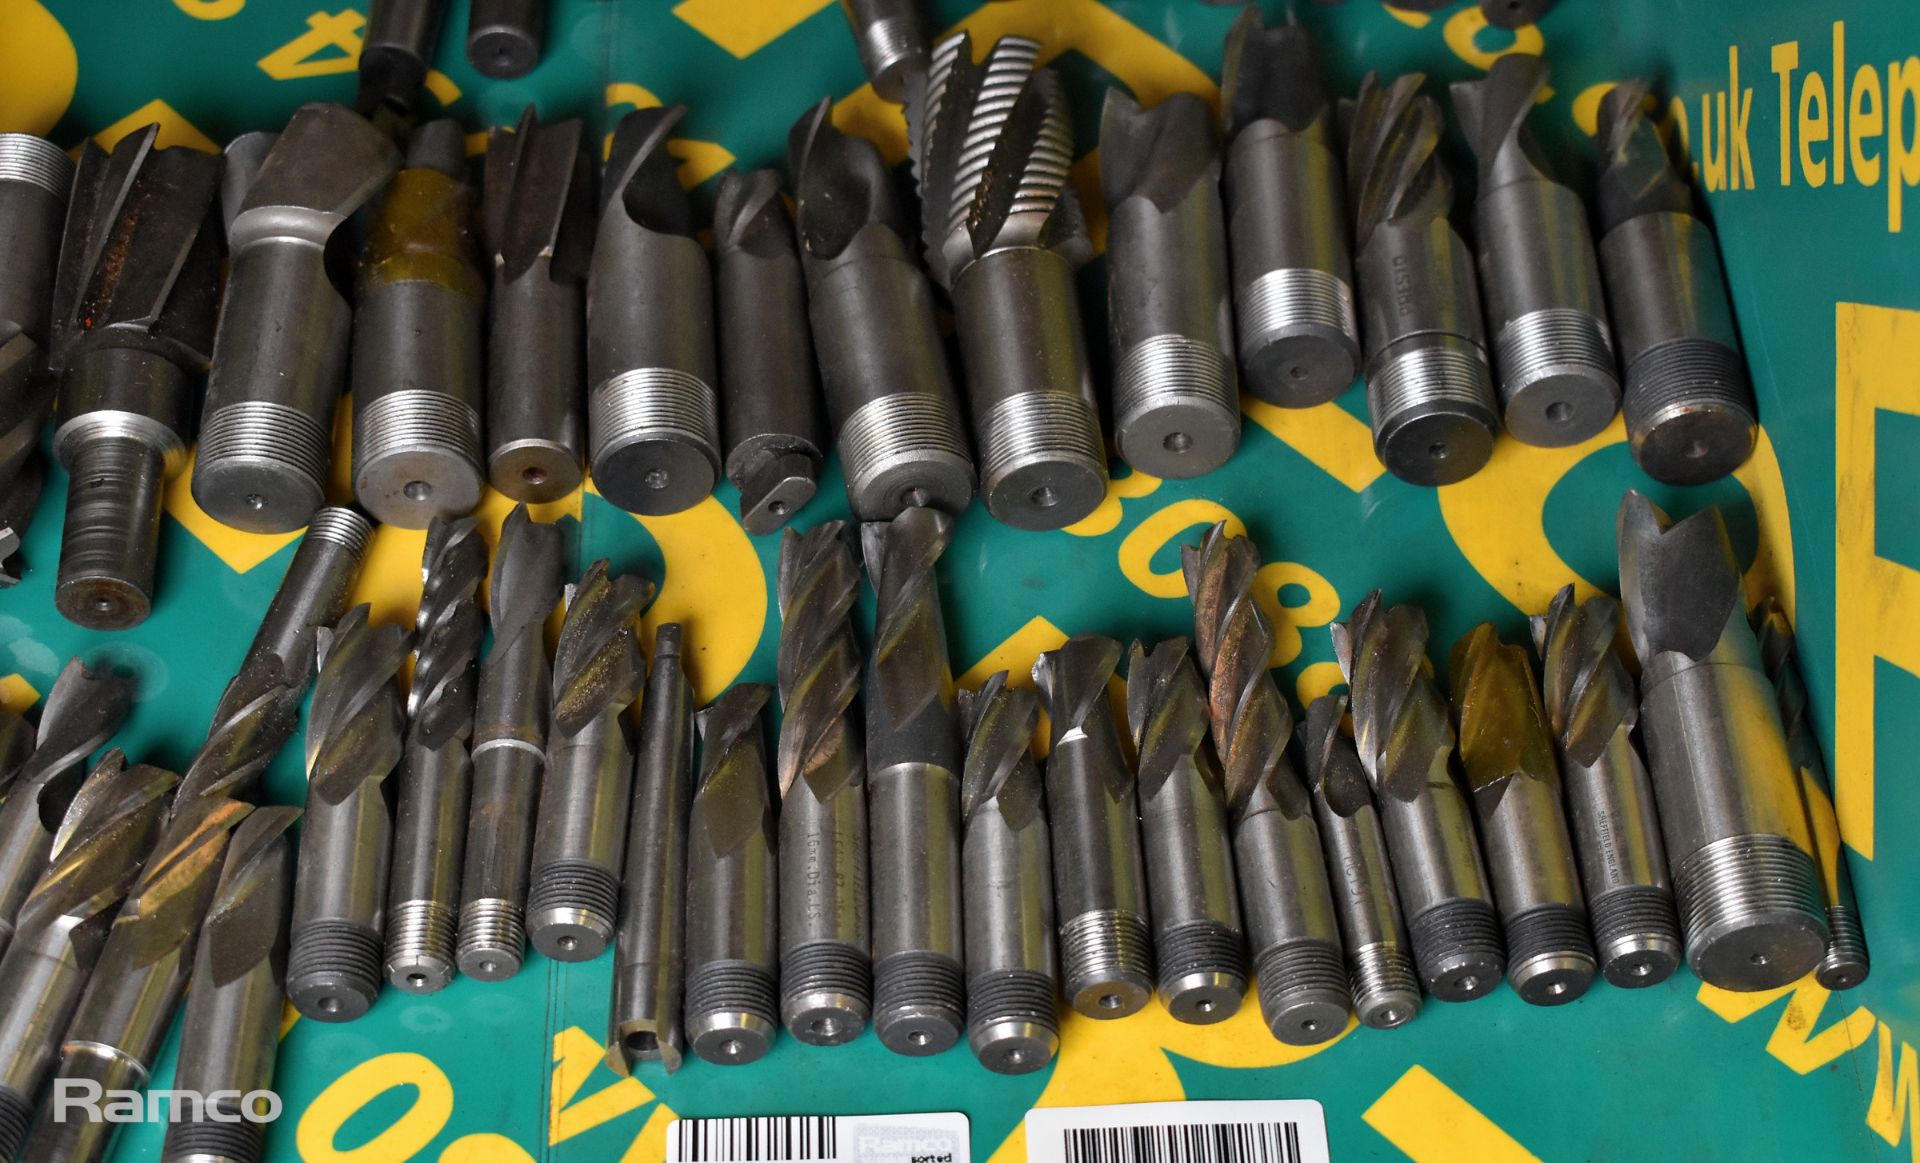 54x HSS drill bits in various sizes - Image 4 of 4